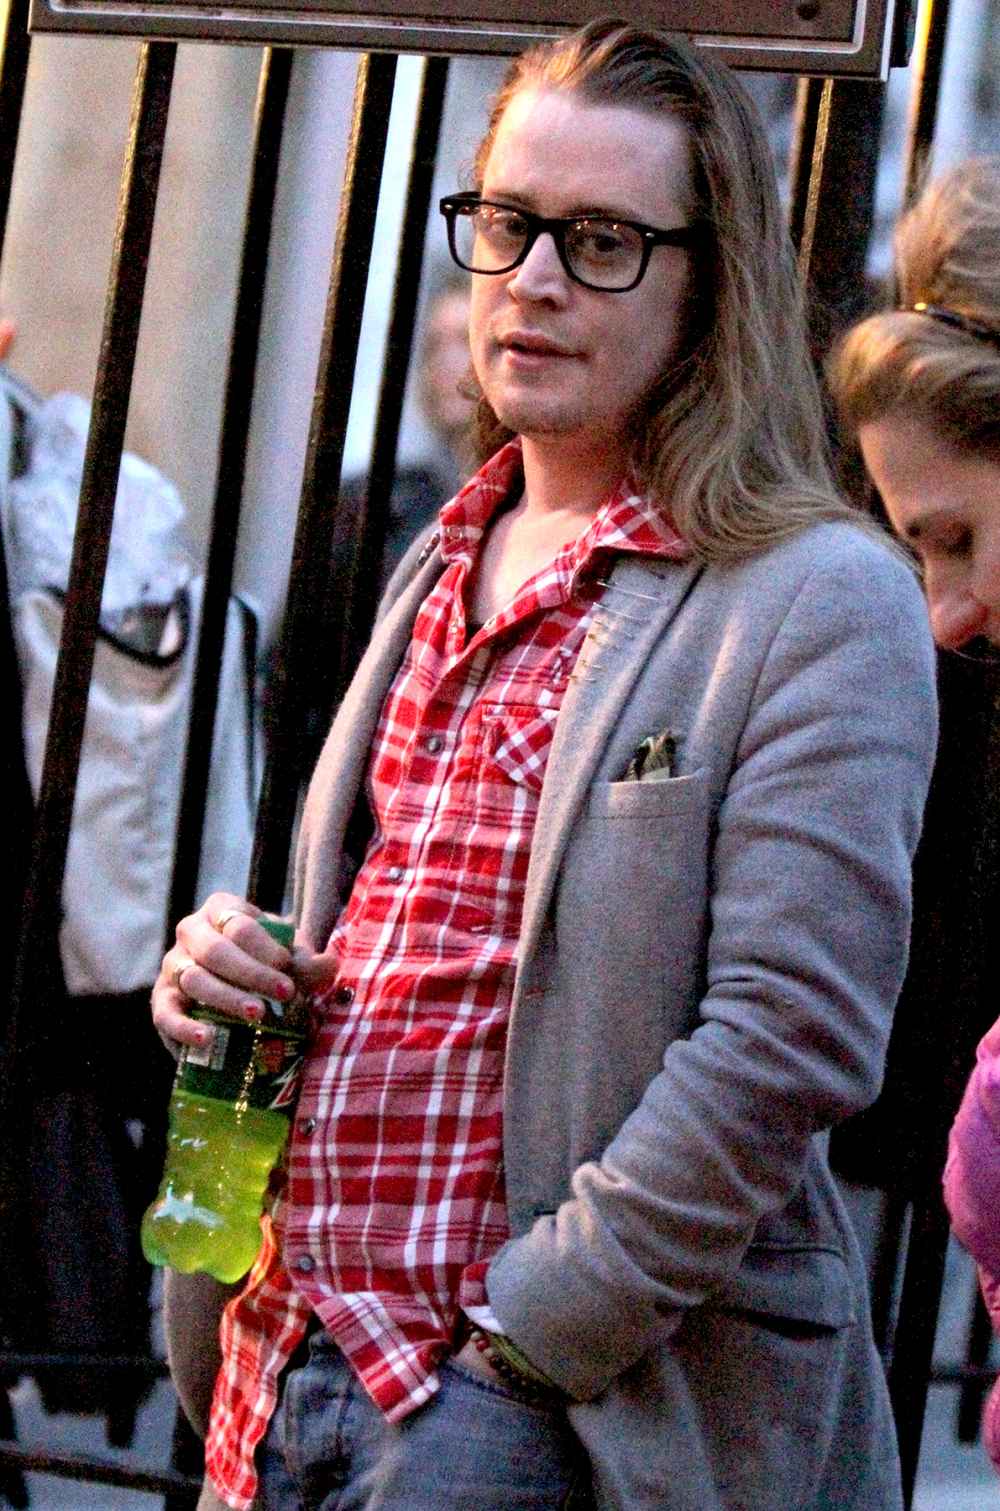 Macaulay Culkin pictured standing outside on the fire escape stairs as he films scenes for 'The Jim Gaffigan Show' in the Soho area of Downtown Manhattan, New York on March 13, 2016.